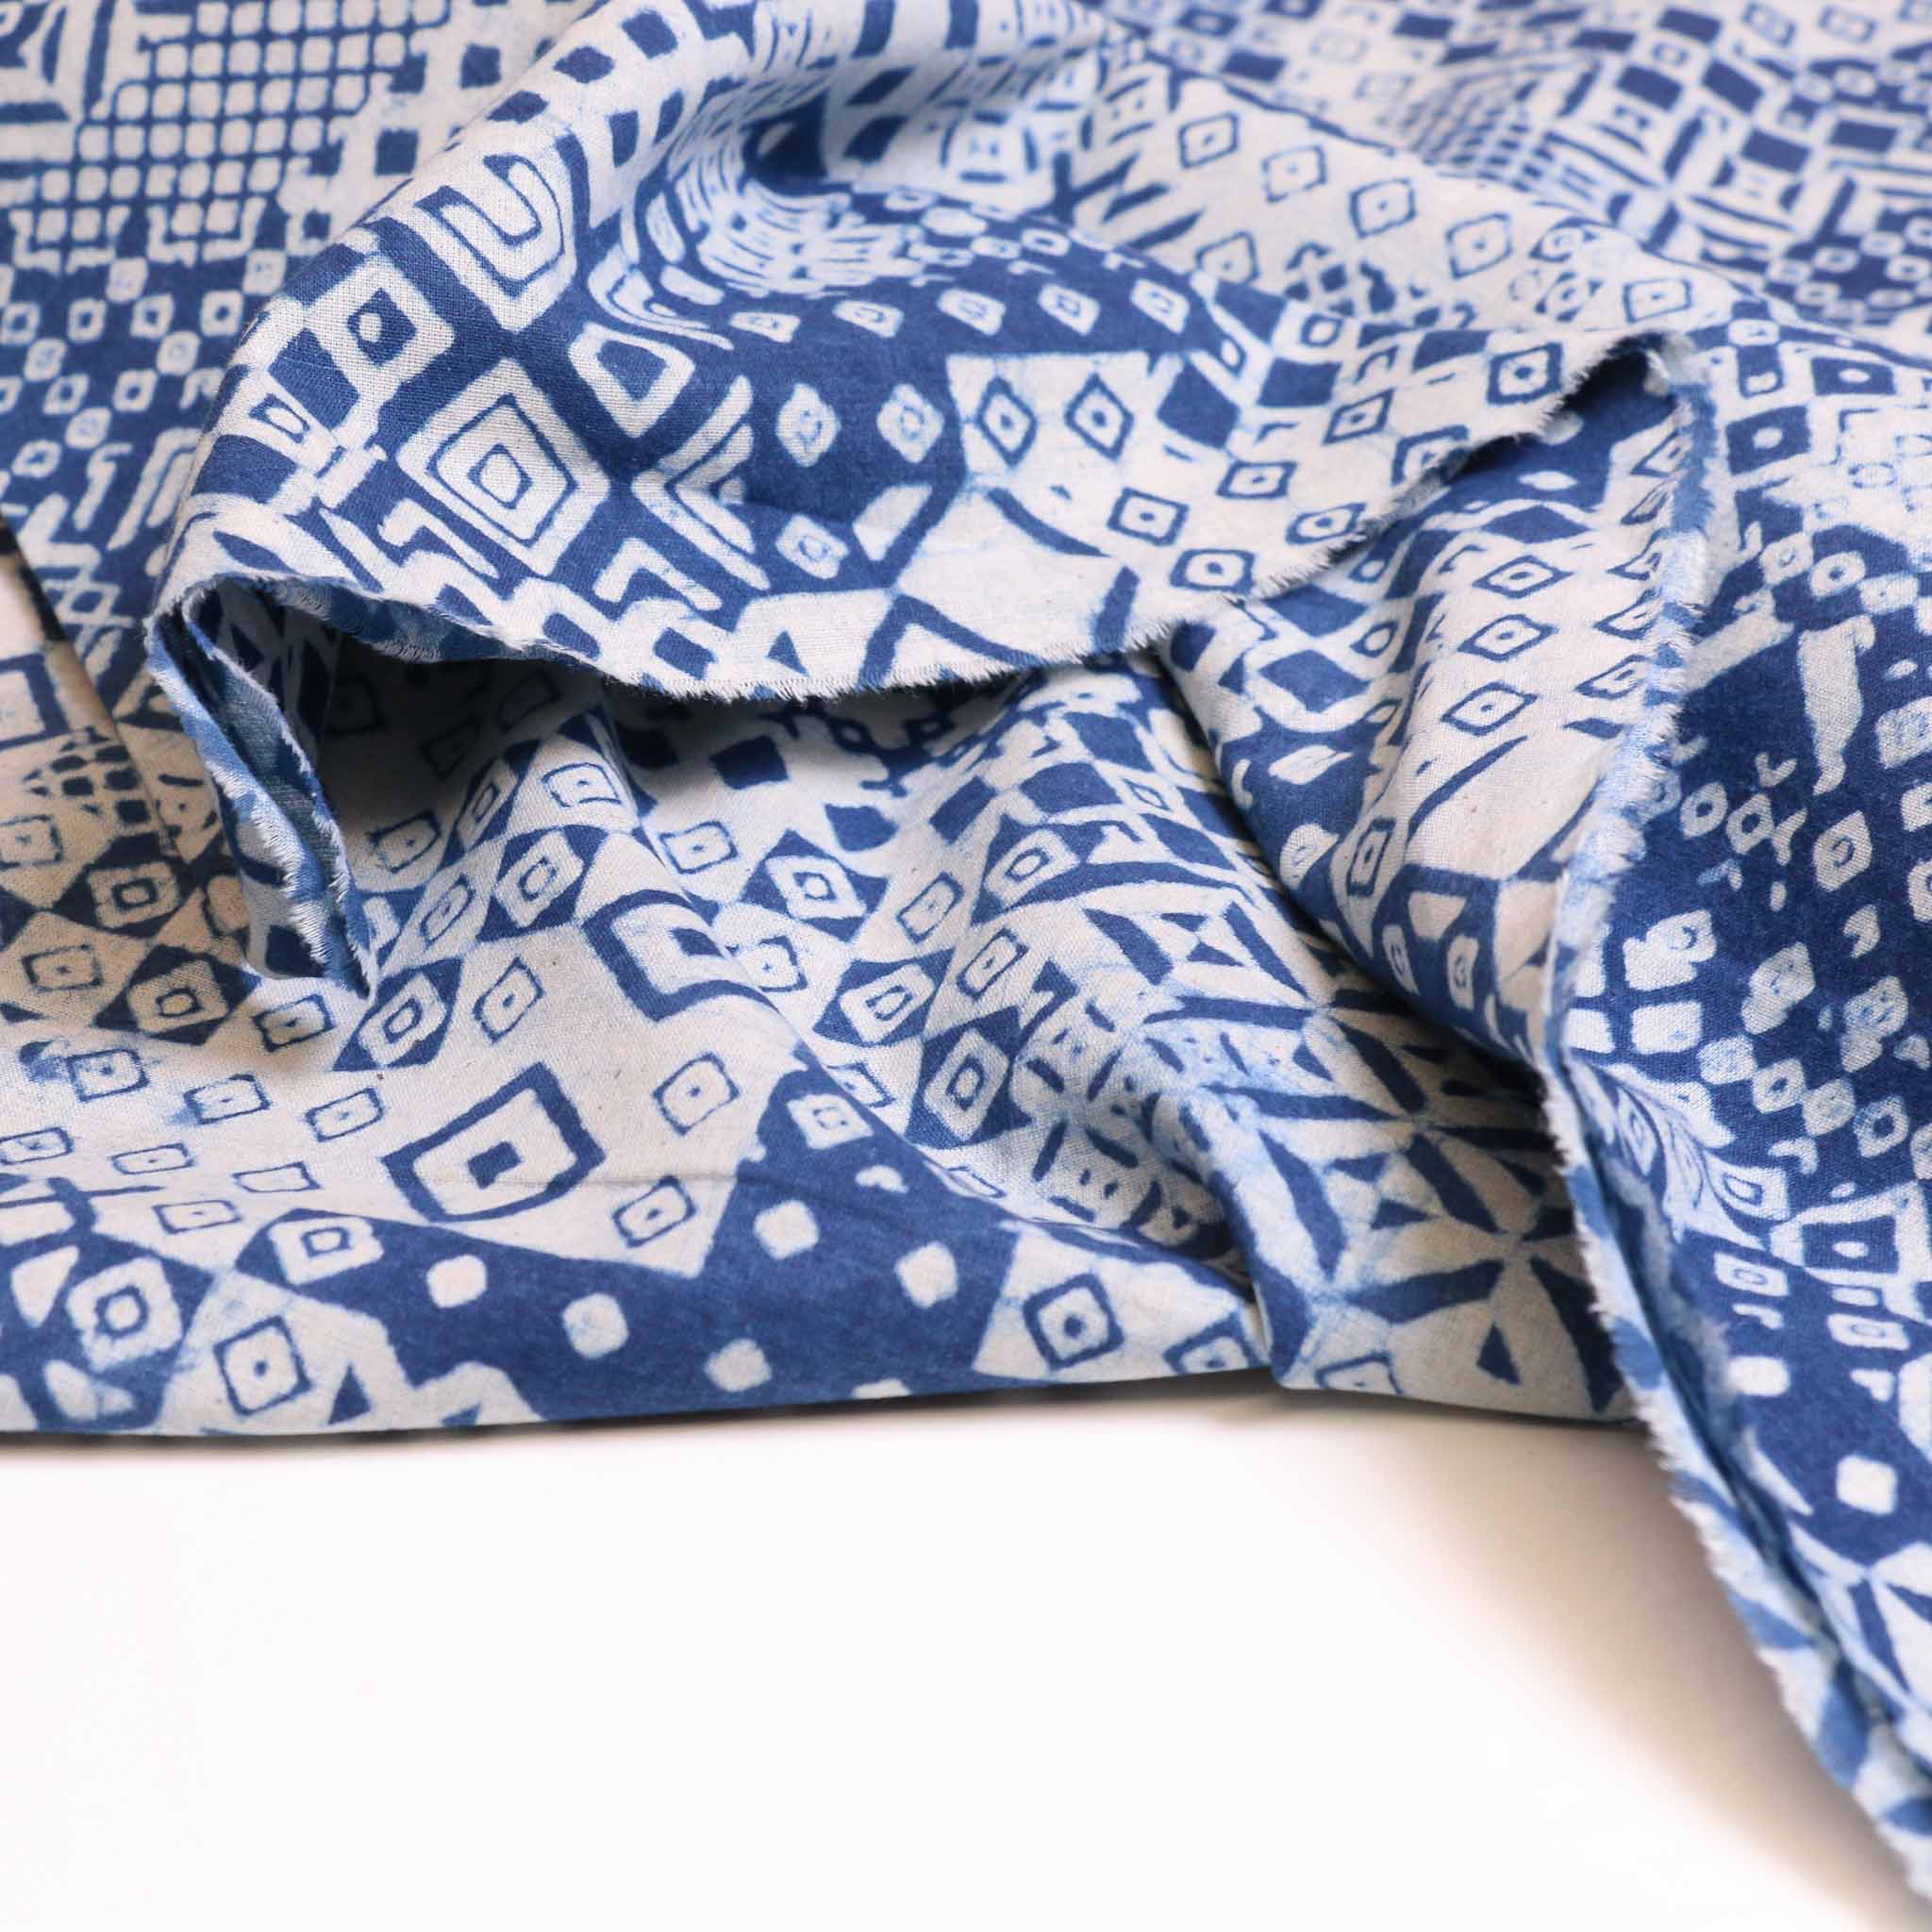 indigo hand block printed 100% cotton dressmaking fabric from India is a fabric collection sourced directly from artisan markers in Indai